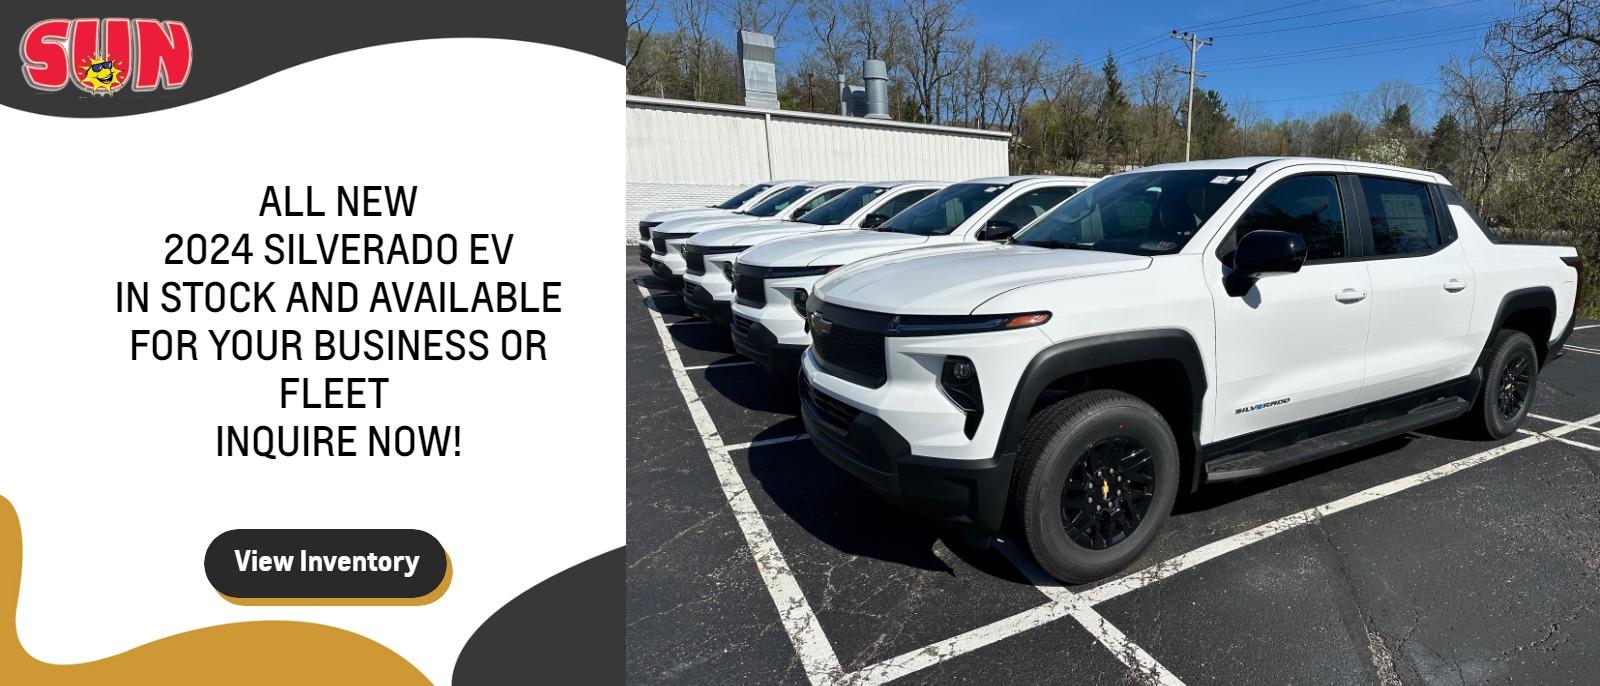 All new 2024 Silverado EV in stock and available now for your Business or Fleet.
Inquire Now!